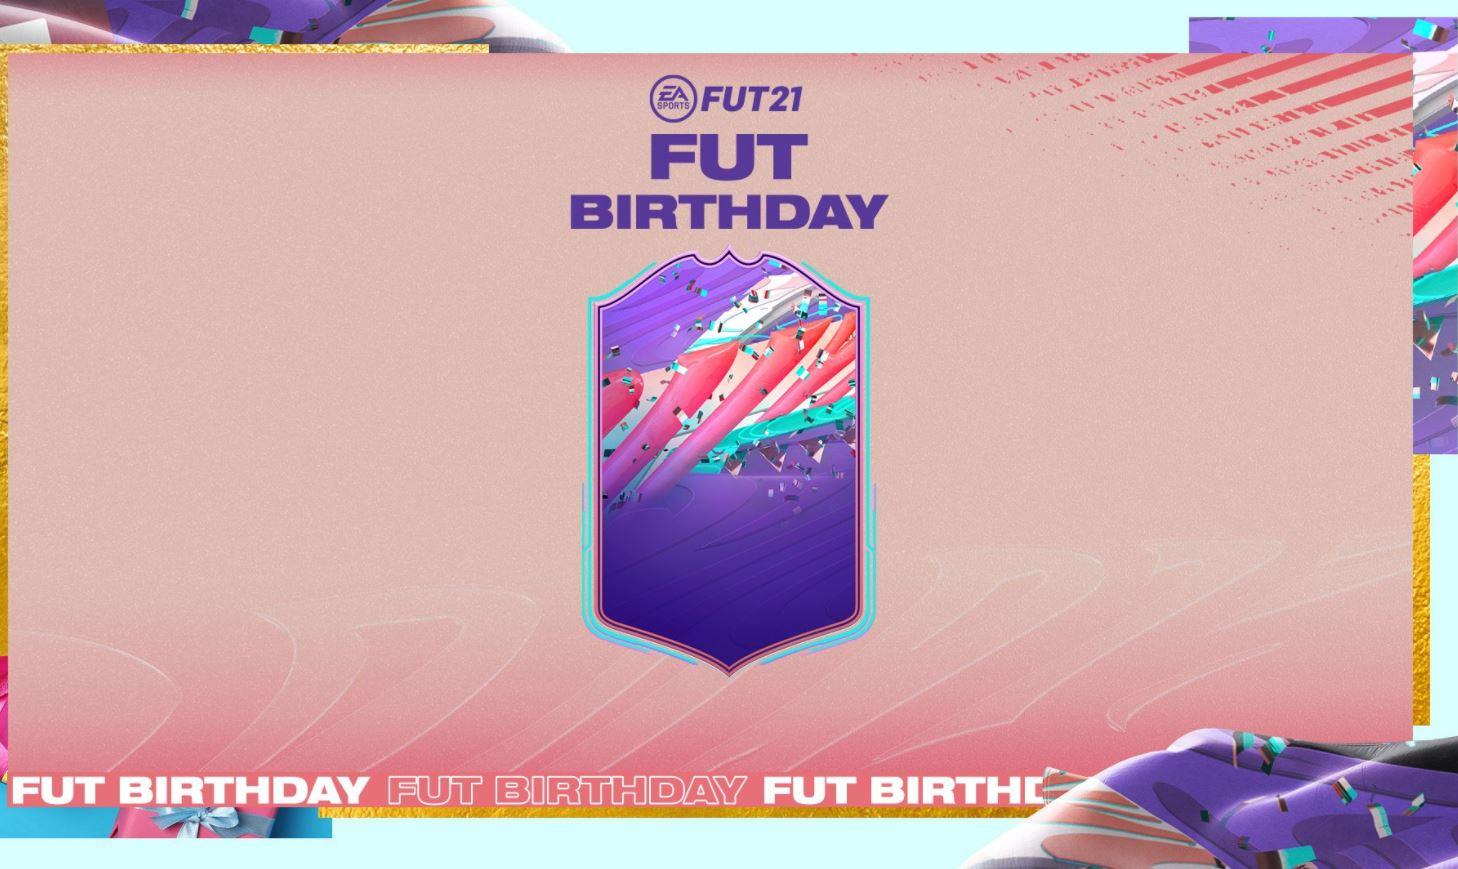 FUT Birthday is here – all info about the Ultimate Team event